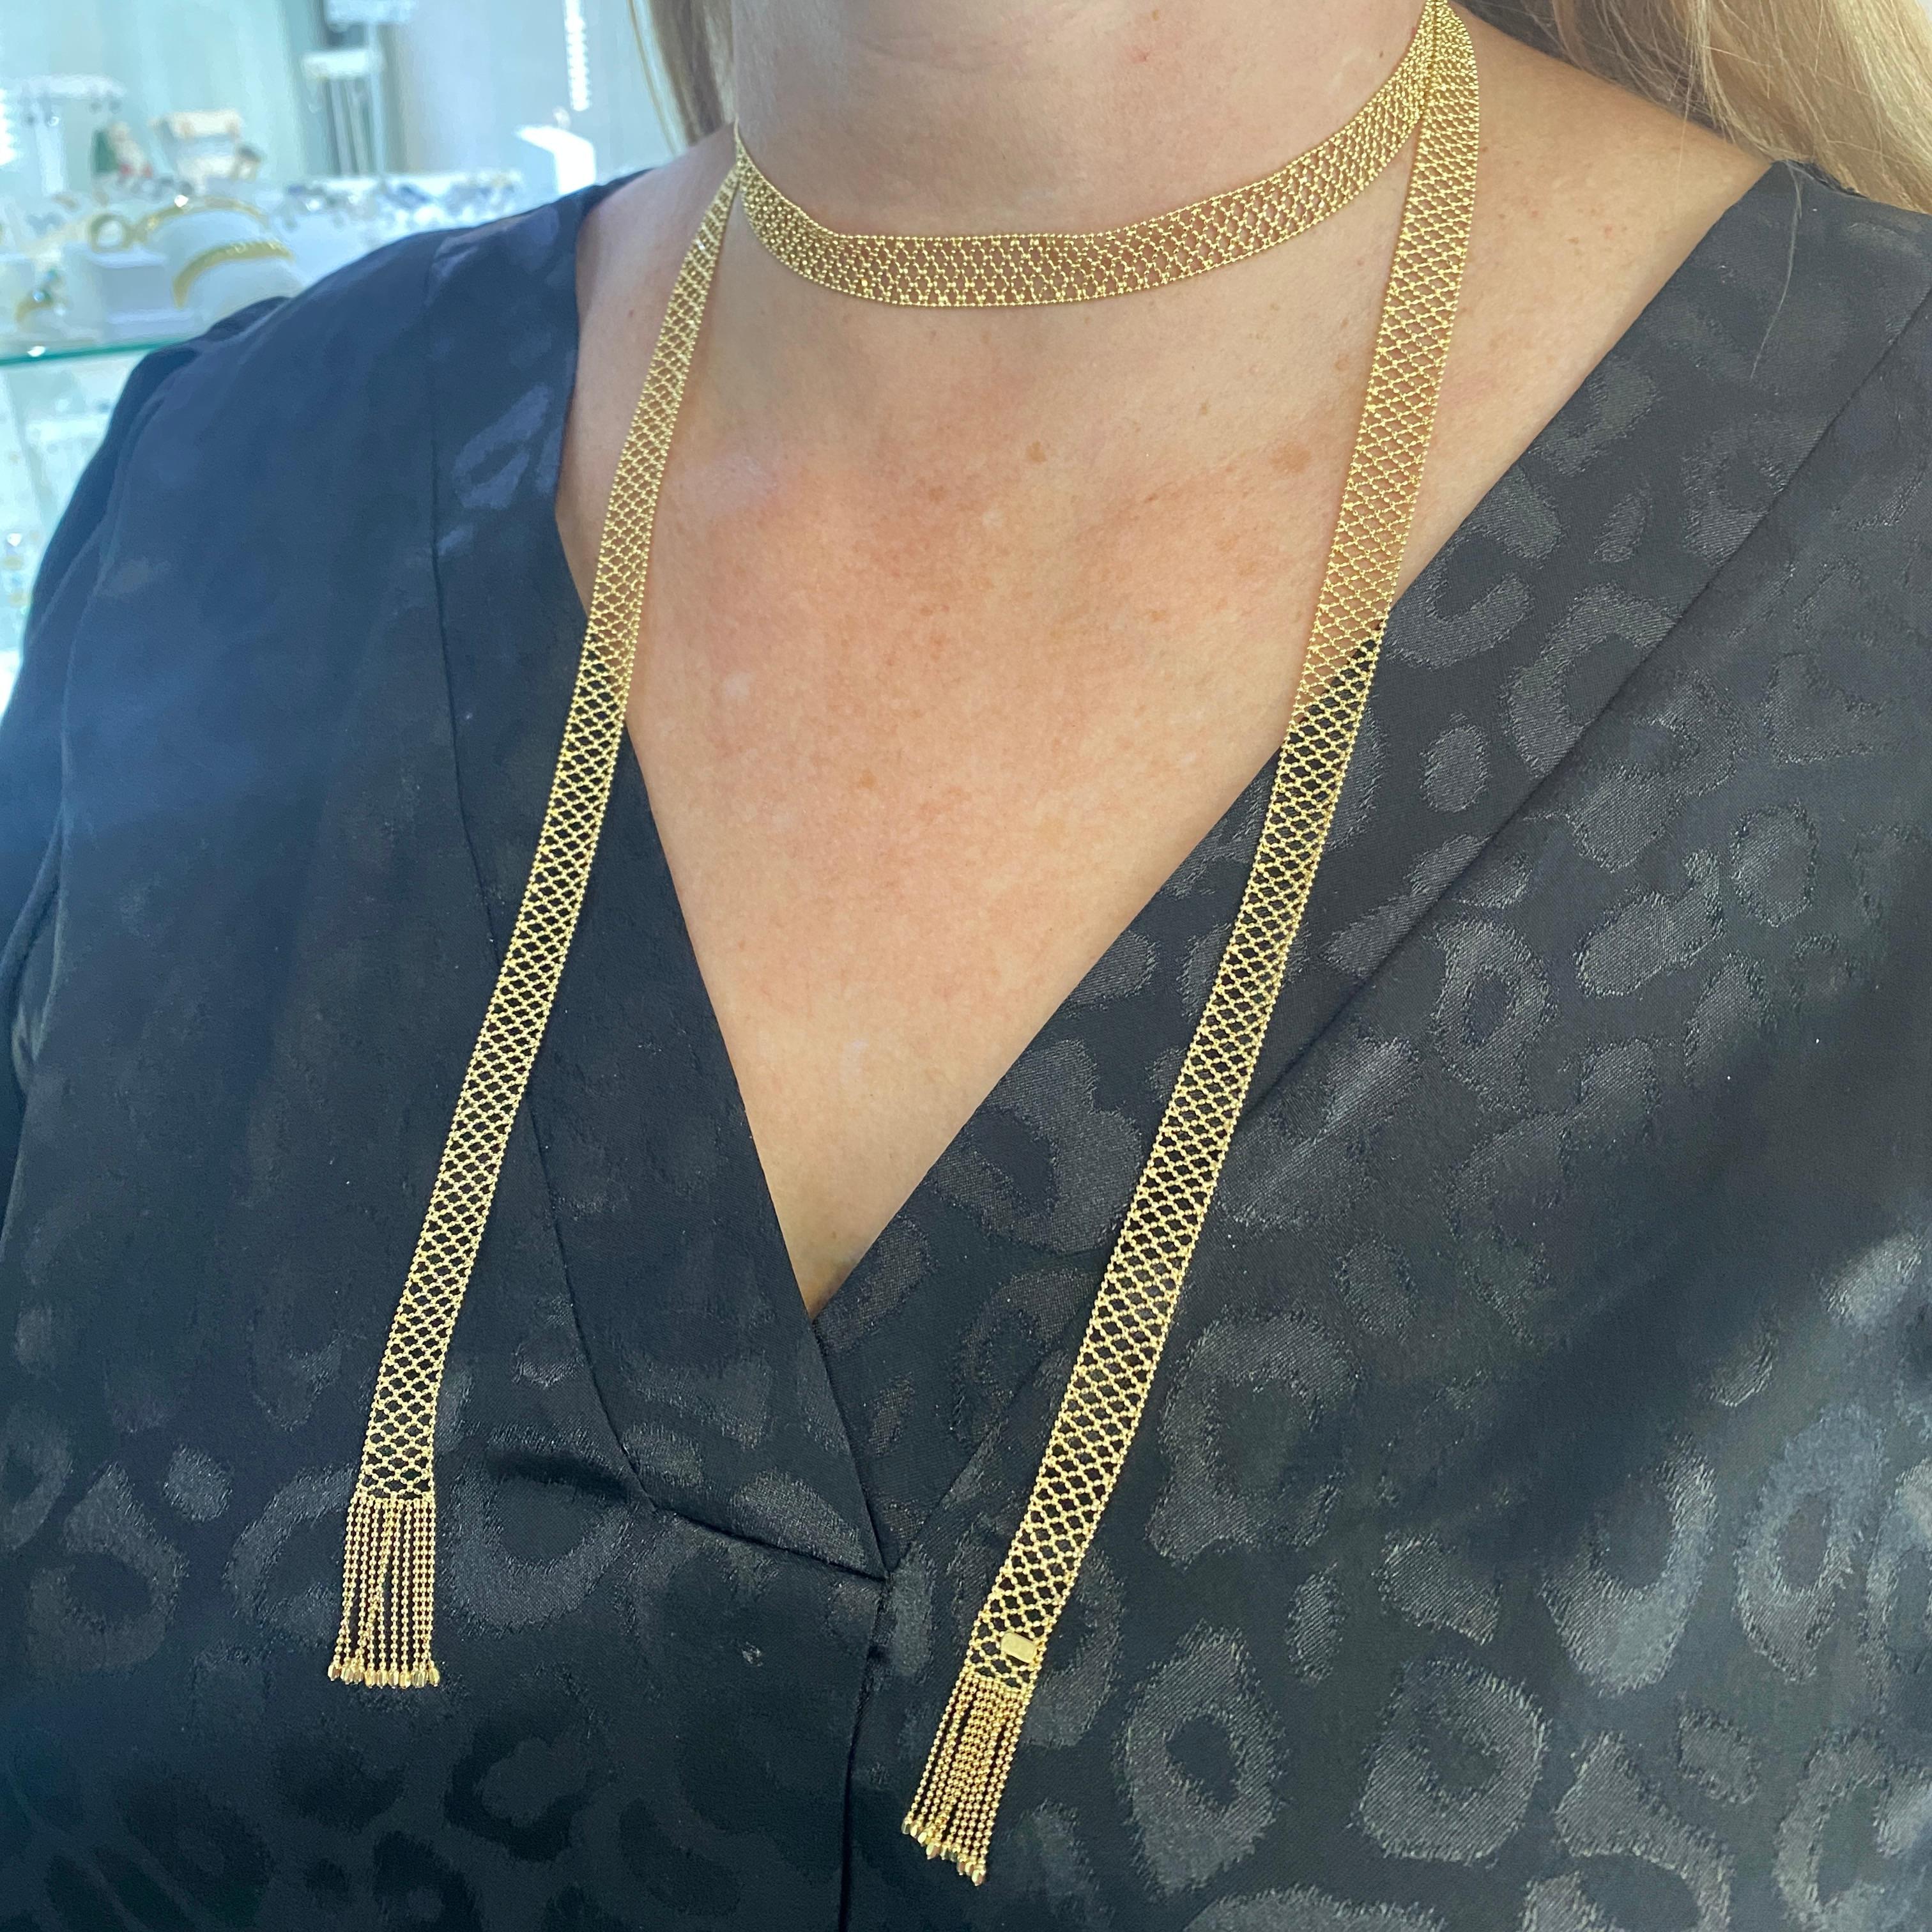 Mesh Scarf Necklace Woven 18 K Gold Many Options for Wear 43.5 x 6 inches  Neuf - En vente à Austin, TX